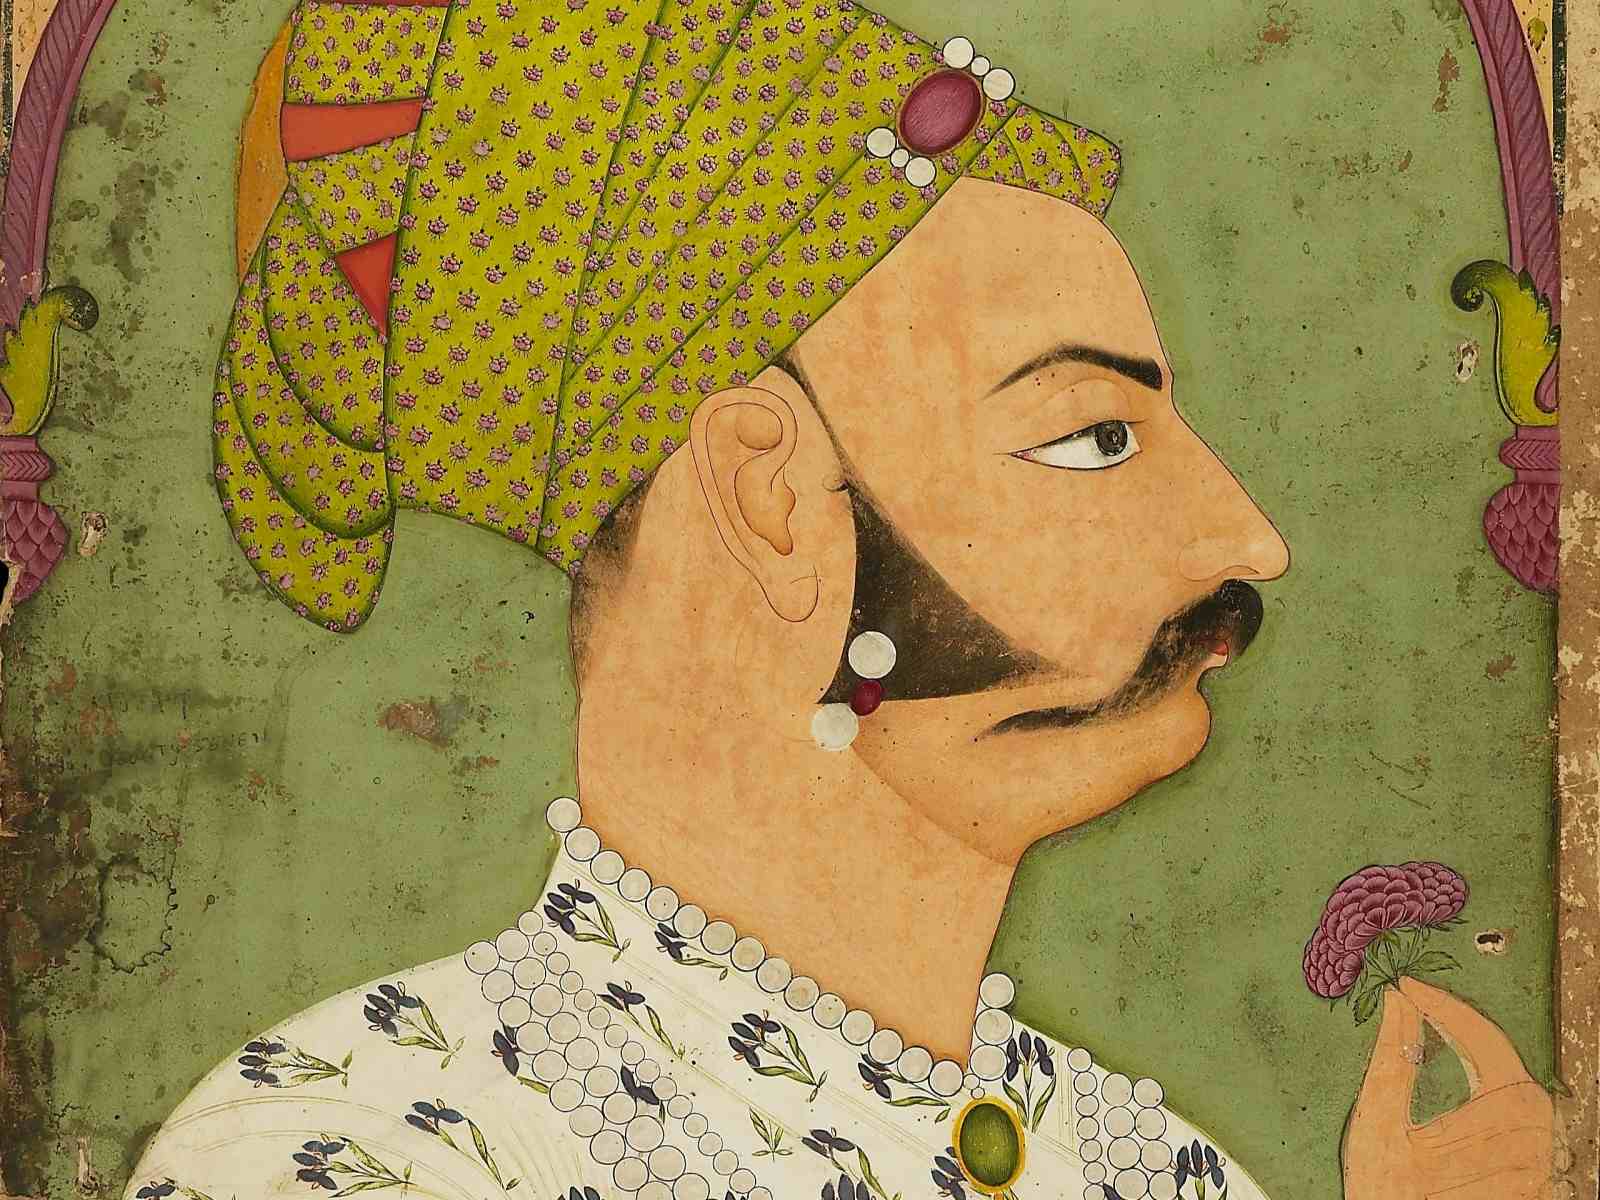 Maharaj Bakhat Singh (India, Rajasthan, Nagaur, ca. 1735); Opaque watercolor and gold on paper
Howard Hodgkin Collection, Purchase, Gift of Florence and Herbert Irving, by exchange, 2022 (Courtesy of the Met)